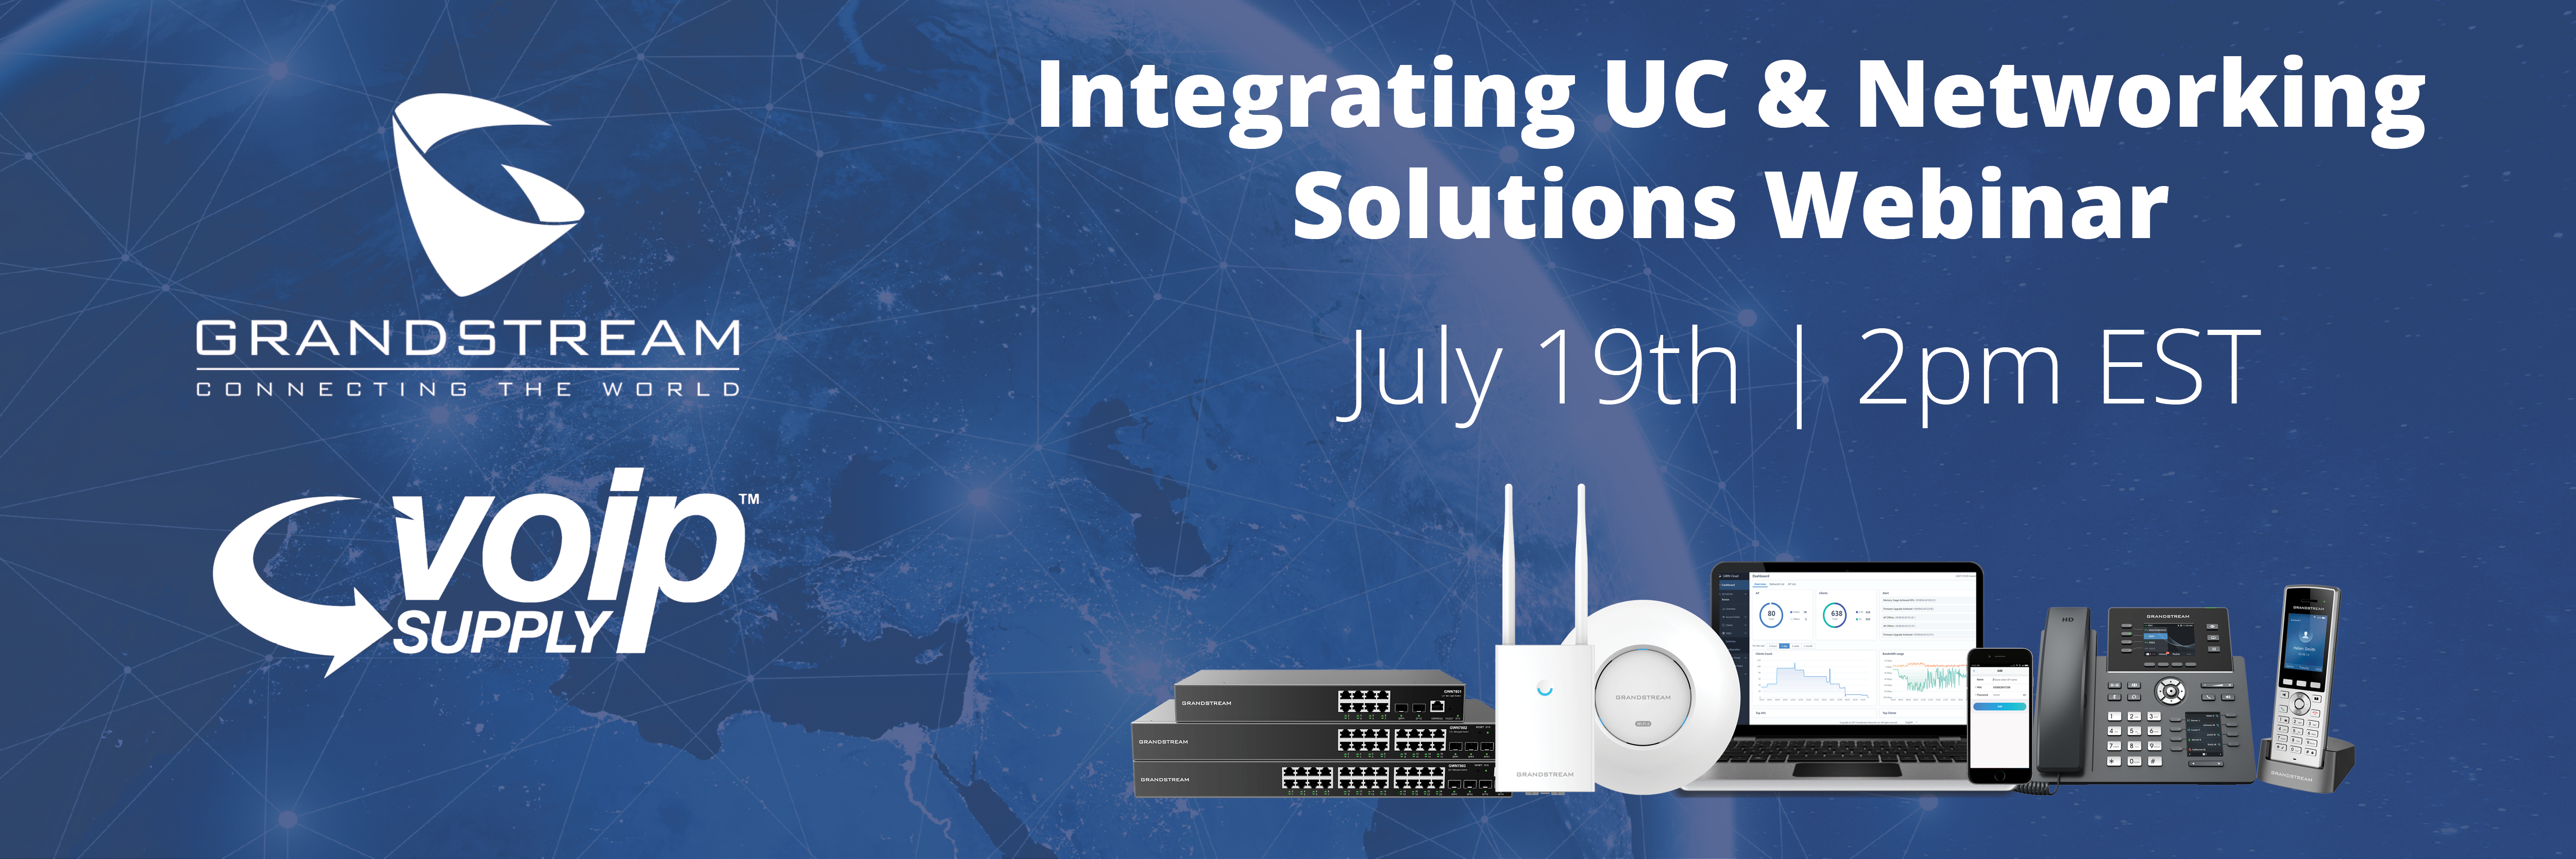 Integrating UC & Networking Solutions Webinar with Grandstream